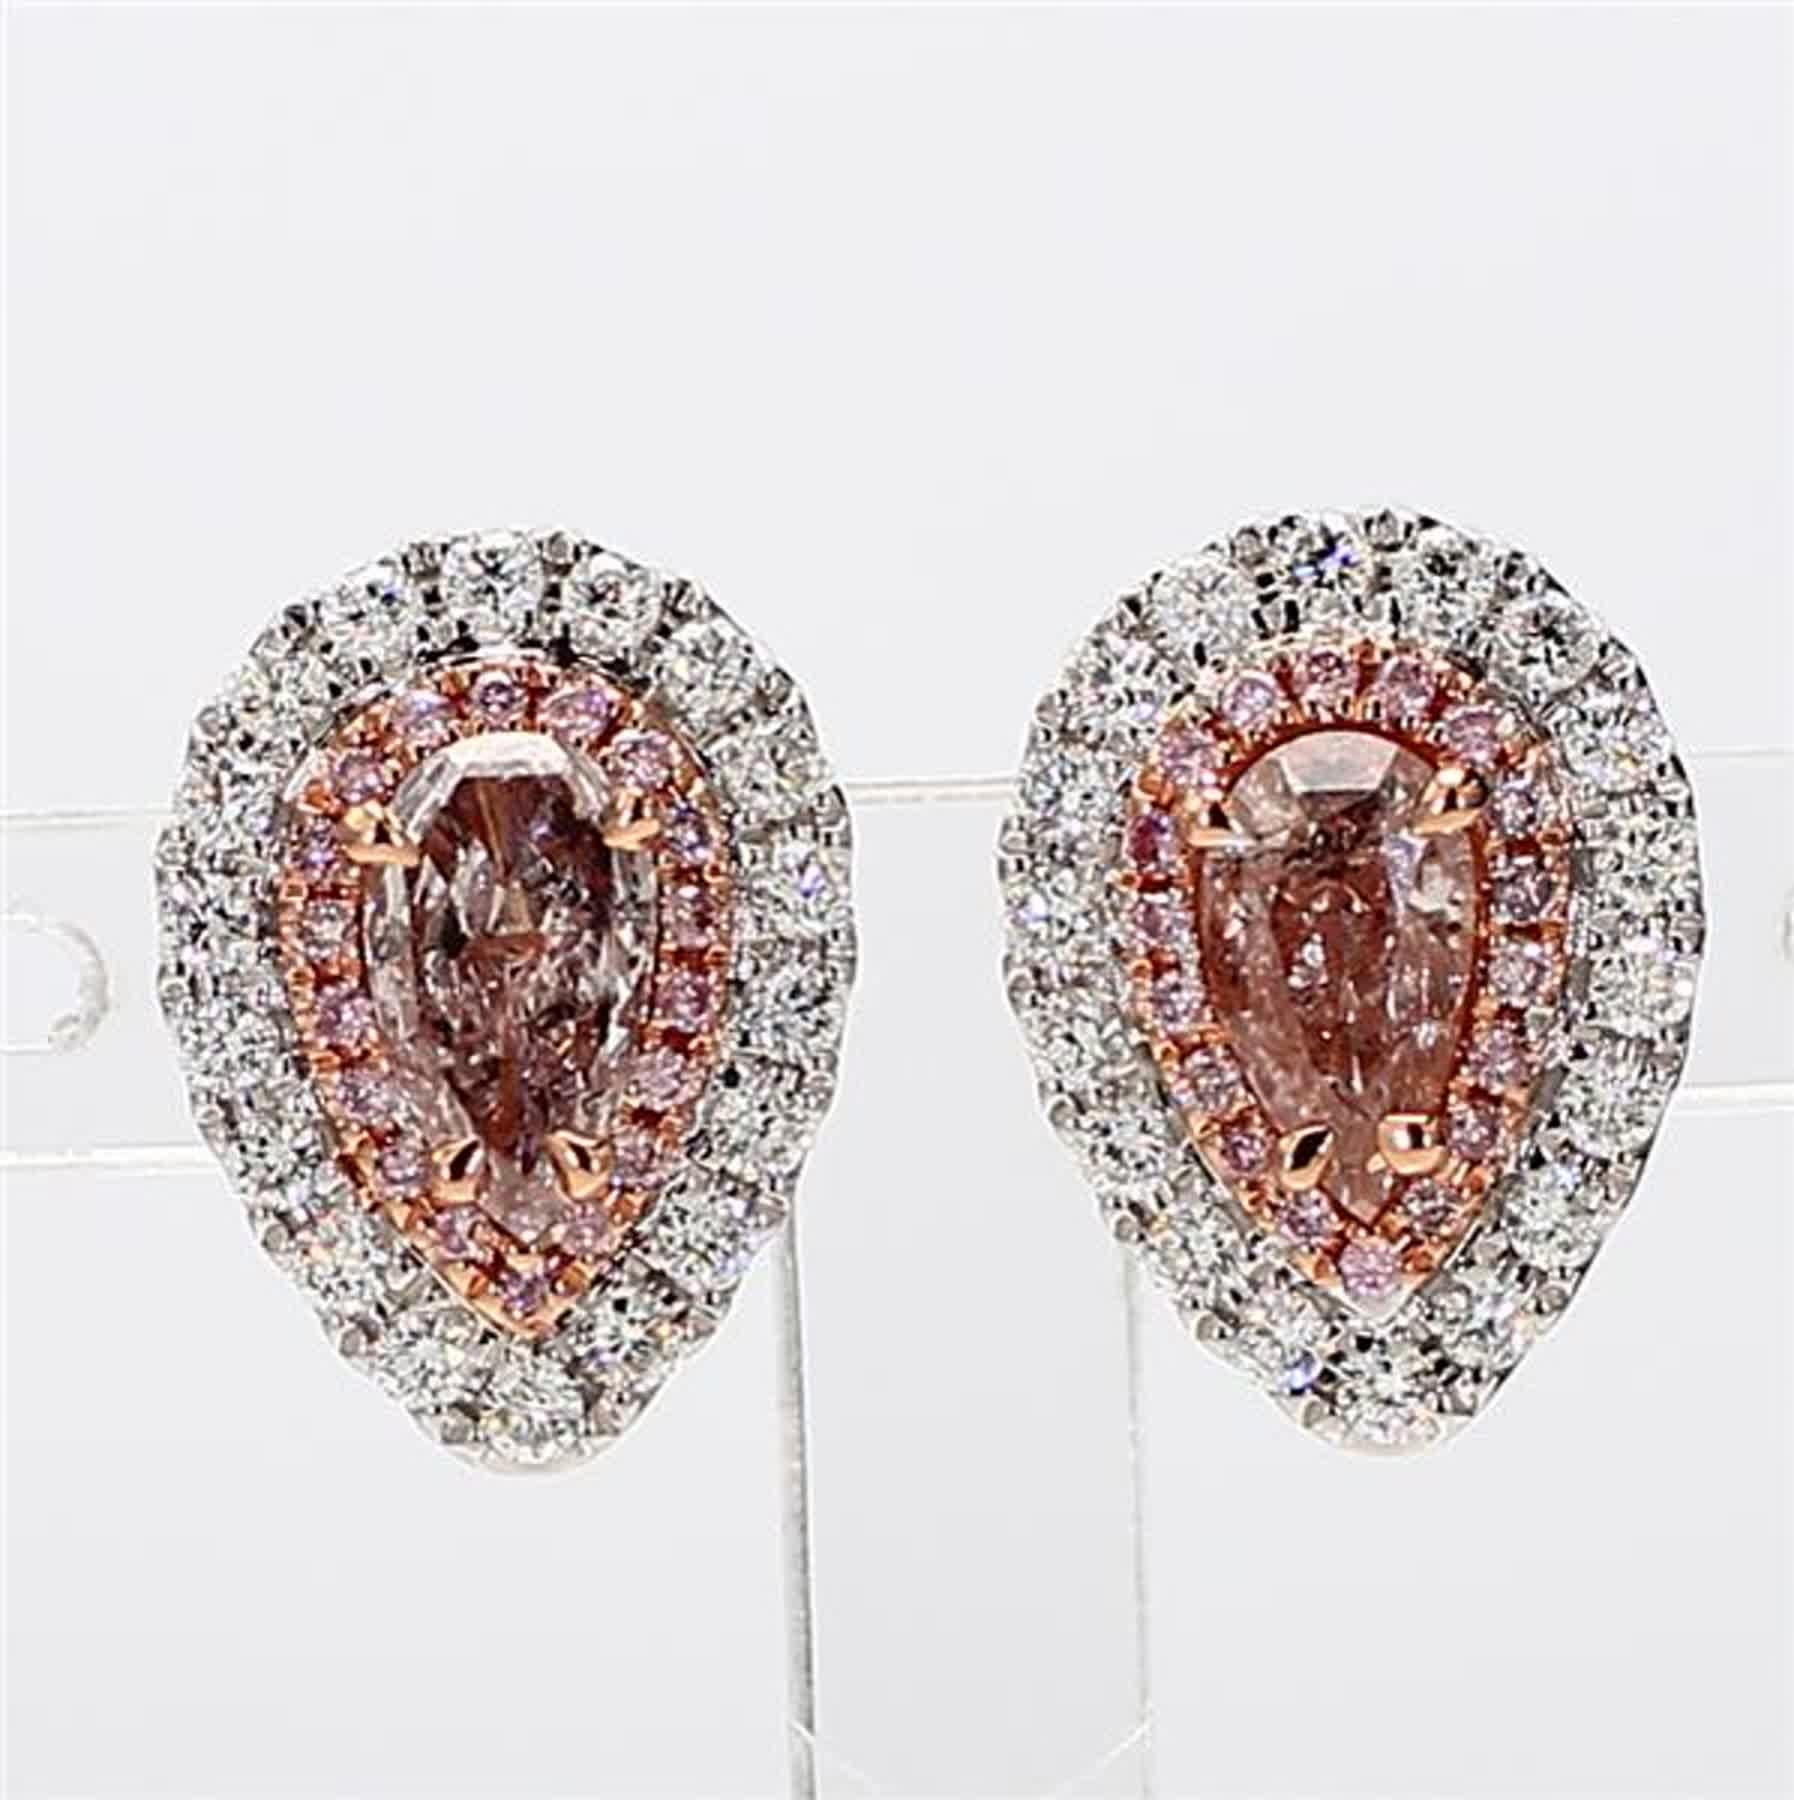 RareGemWorld's classic GIA certified diamond earrings. Mounted in a beautiful 18K Rose and White Gold setting with natural pear cut pink diamonds. The yellow diamonds are surrounded by small round natural white diamond melee and small round natural